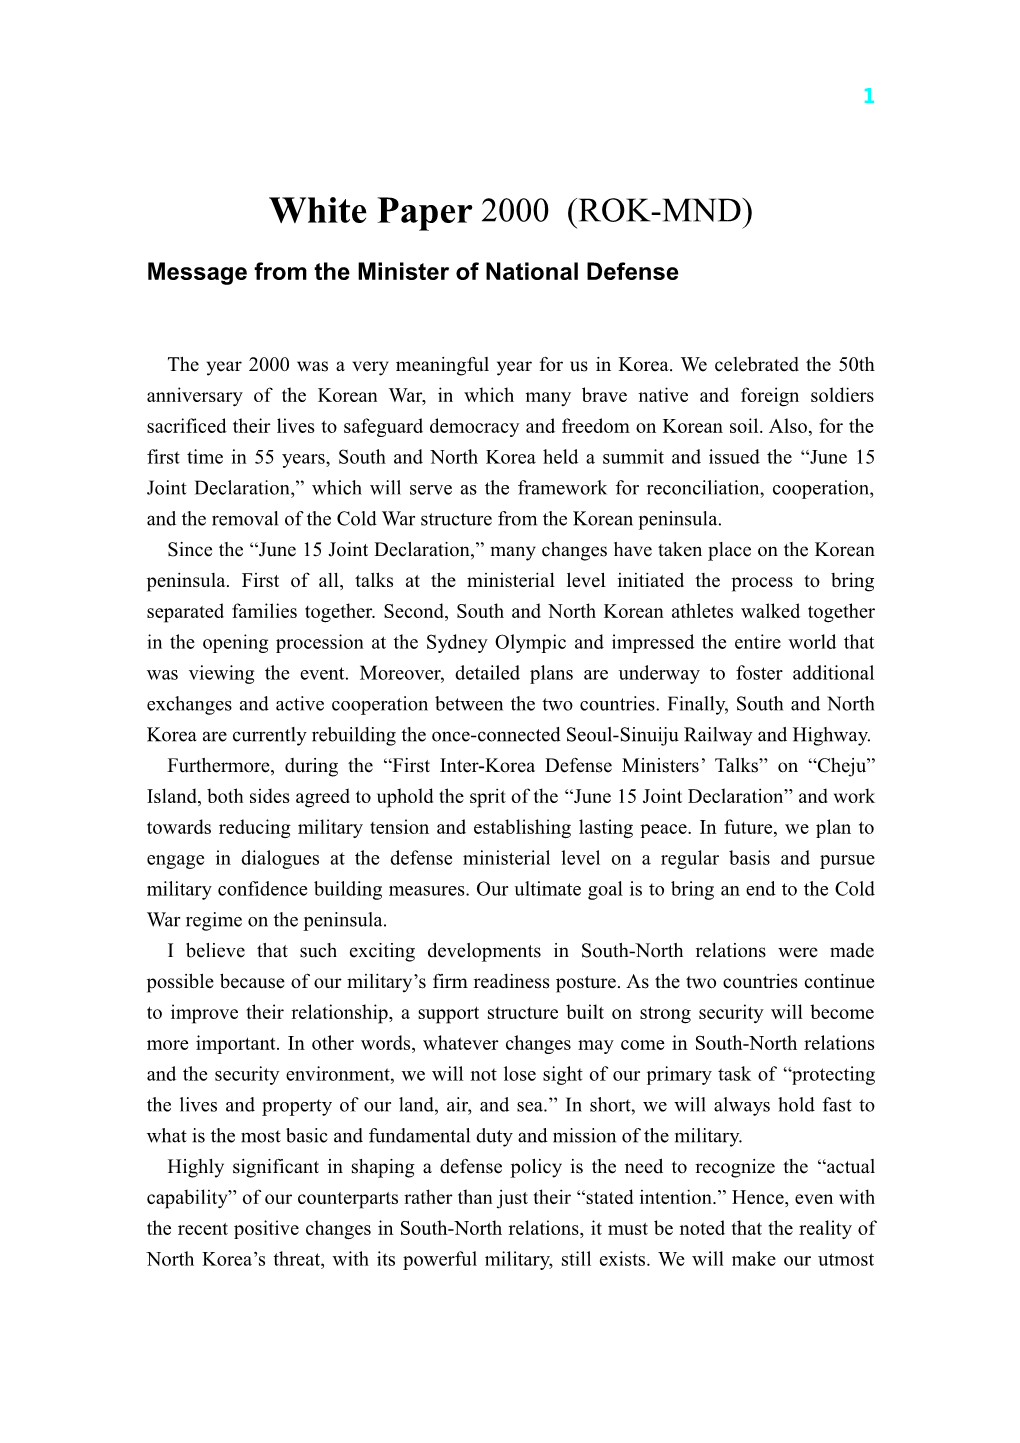 Message from the Minister of National Defense